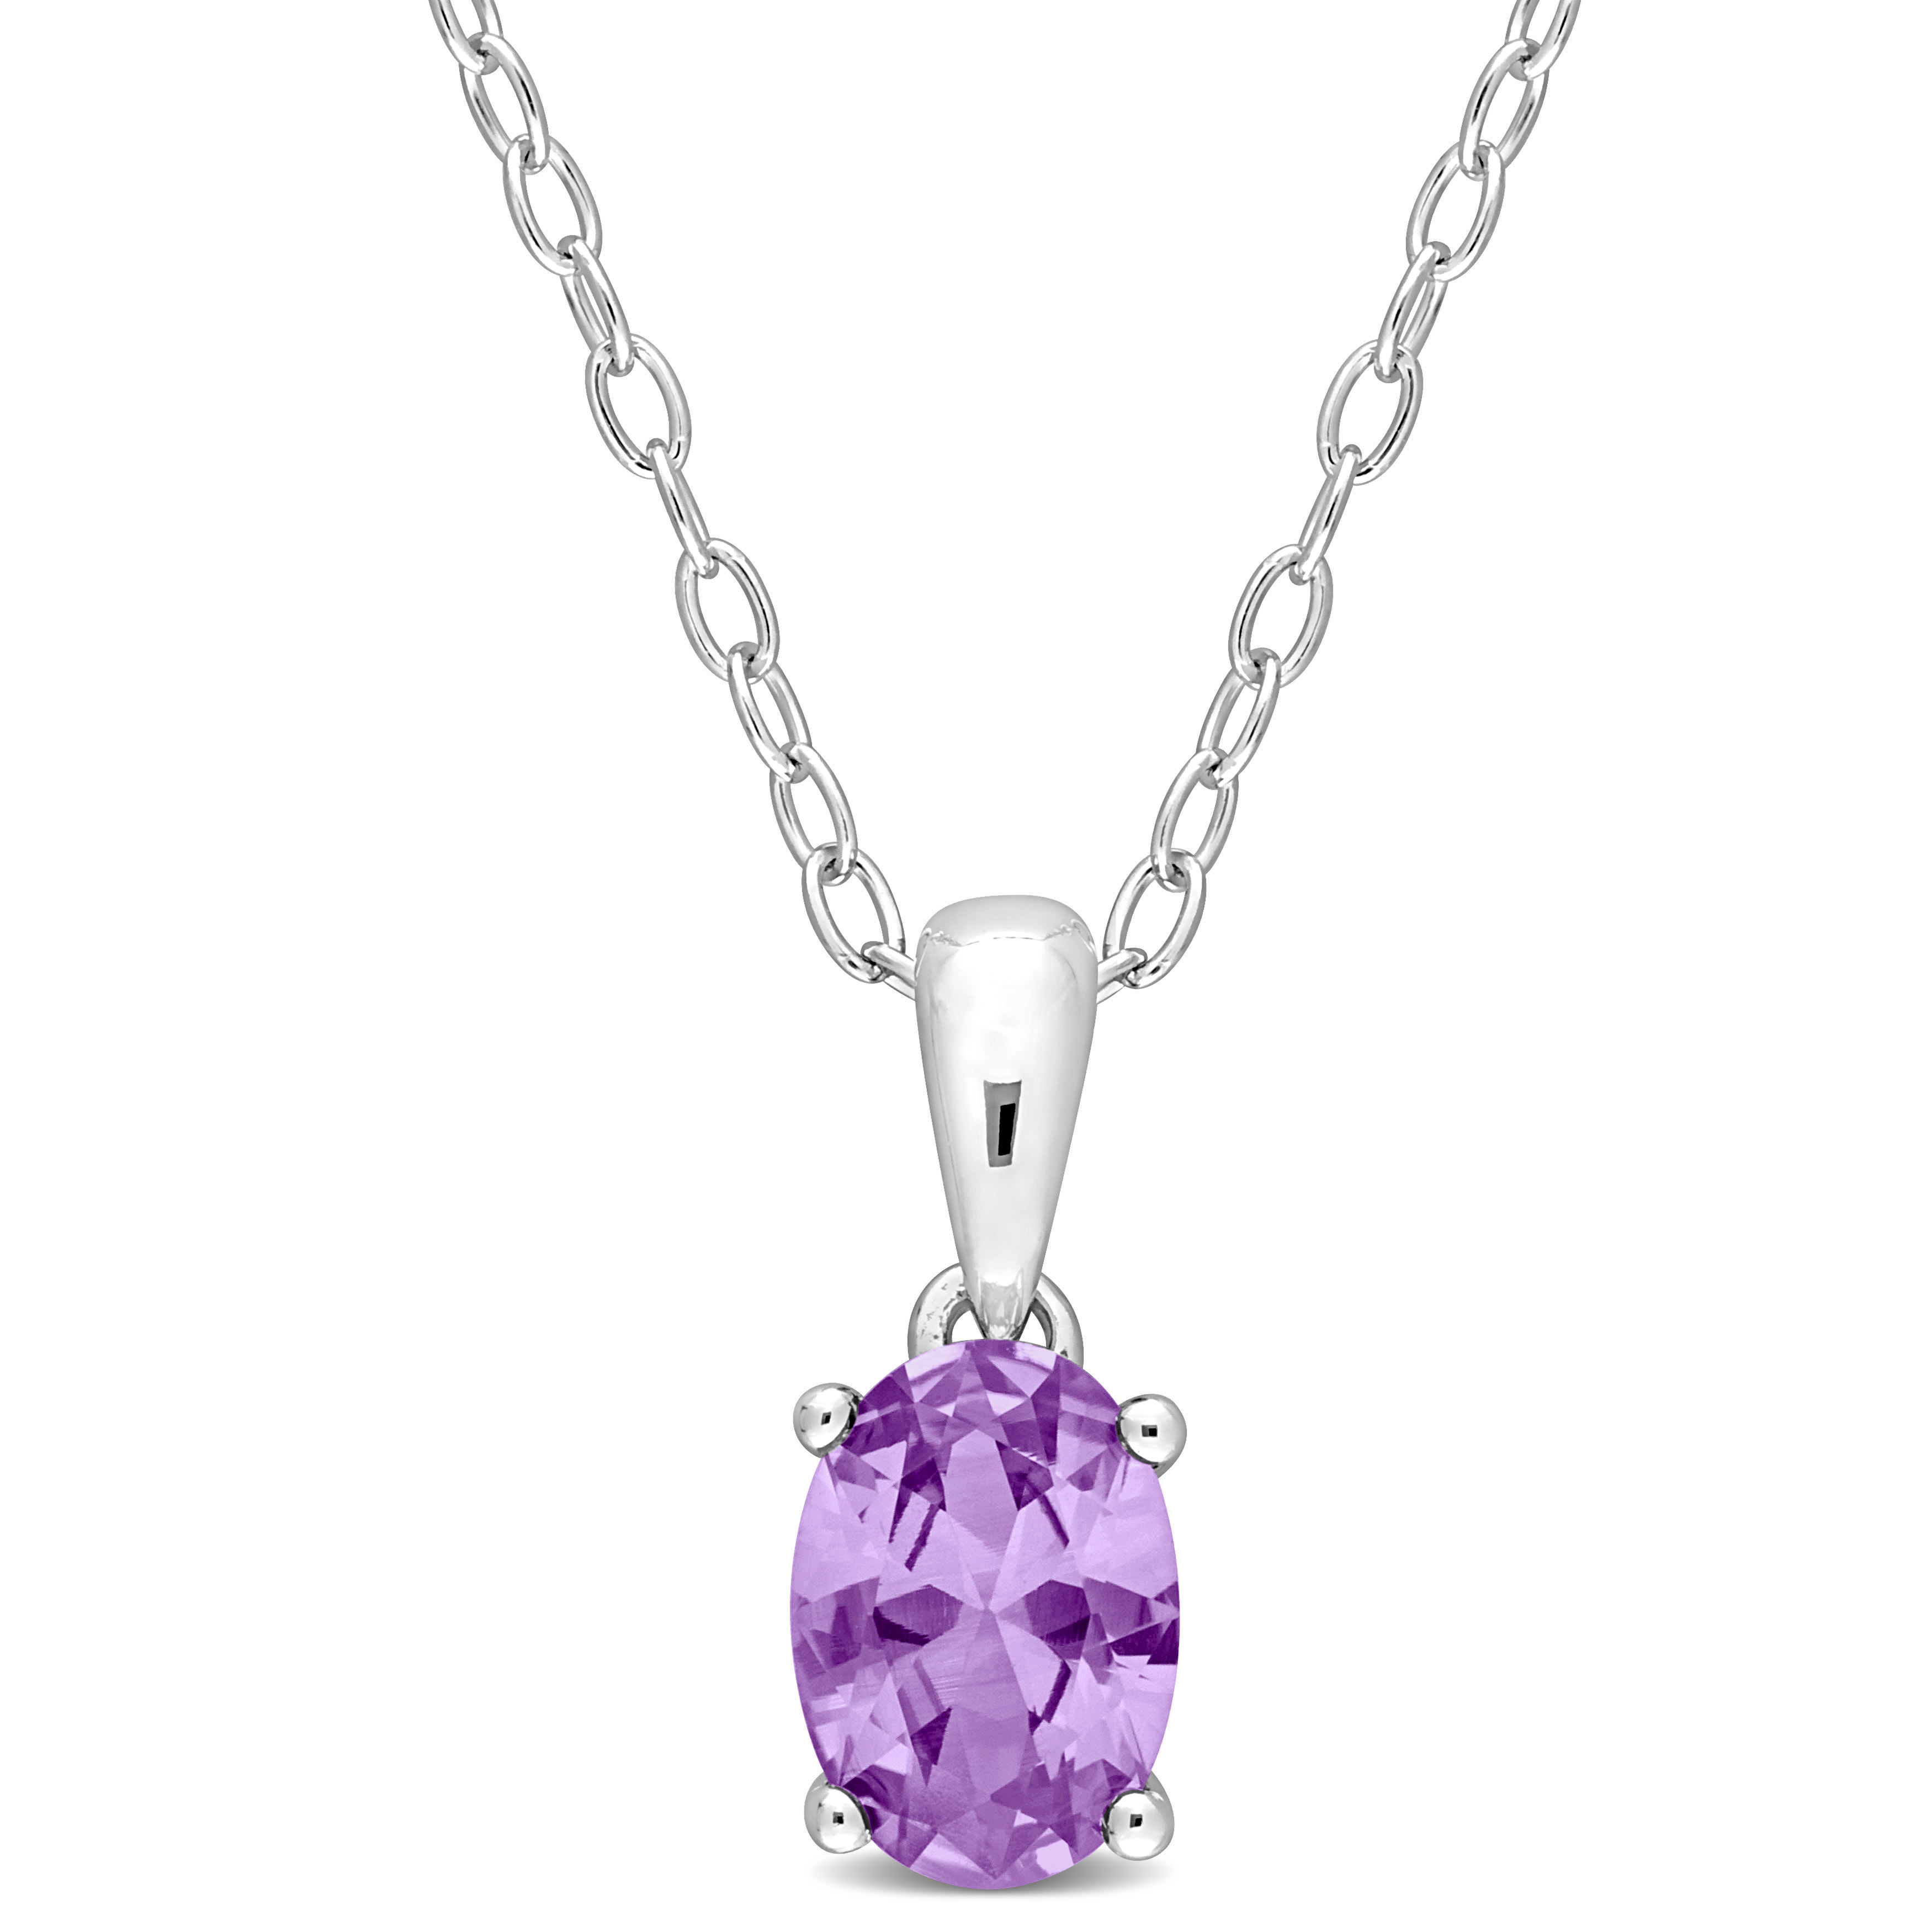 1 1/4 CT TGW Oval Simulated Alexandrite Solitaire Heart Design Pendant with Chain in Sterling Silver - 18 in.